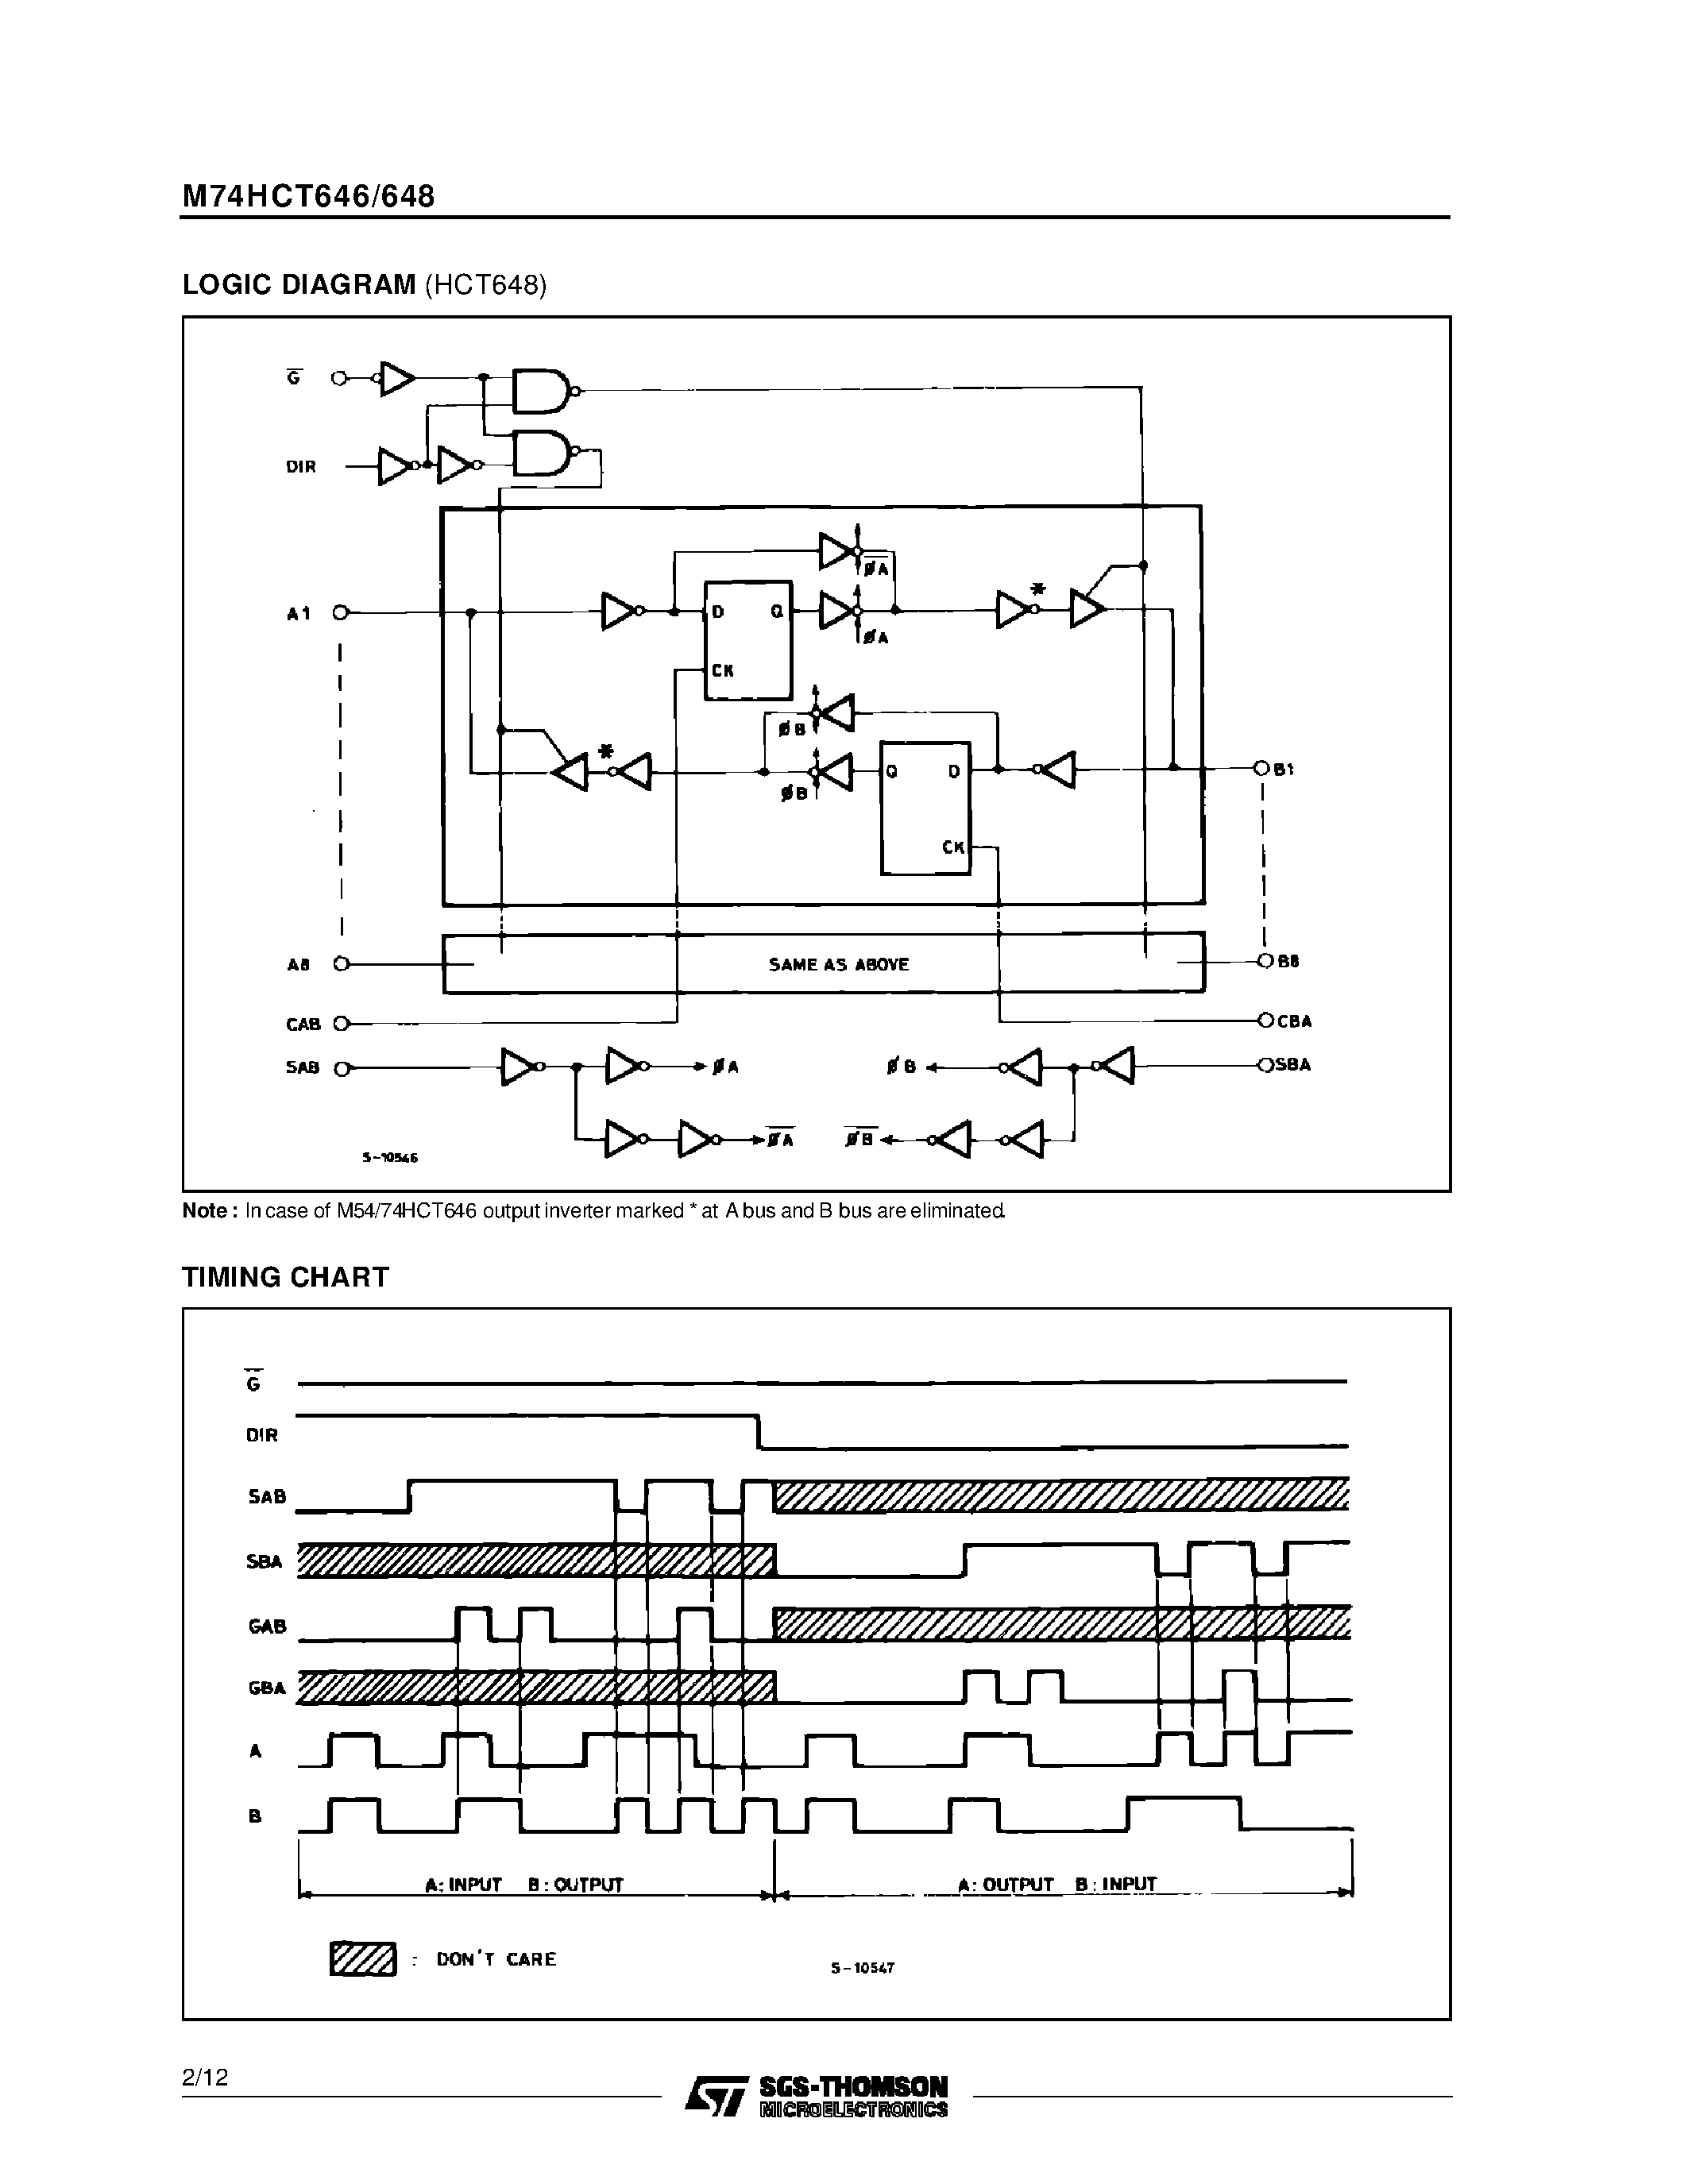 Datasheet M74HCT648 - HCT646 OCTAL BUS TRANSCEIVER/REGISTER 3-STATE HCT648 OCTAL BUS TRANSCEIVER/REGISTER 3-STATE / INV. page 2